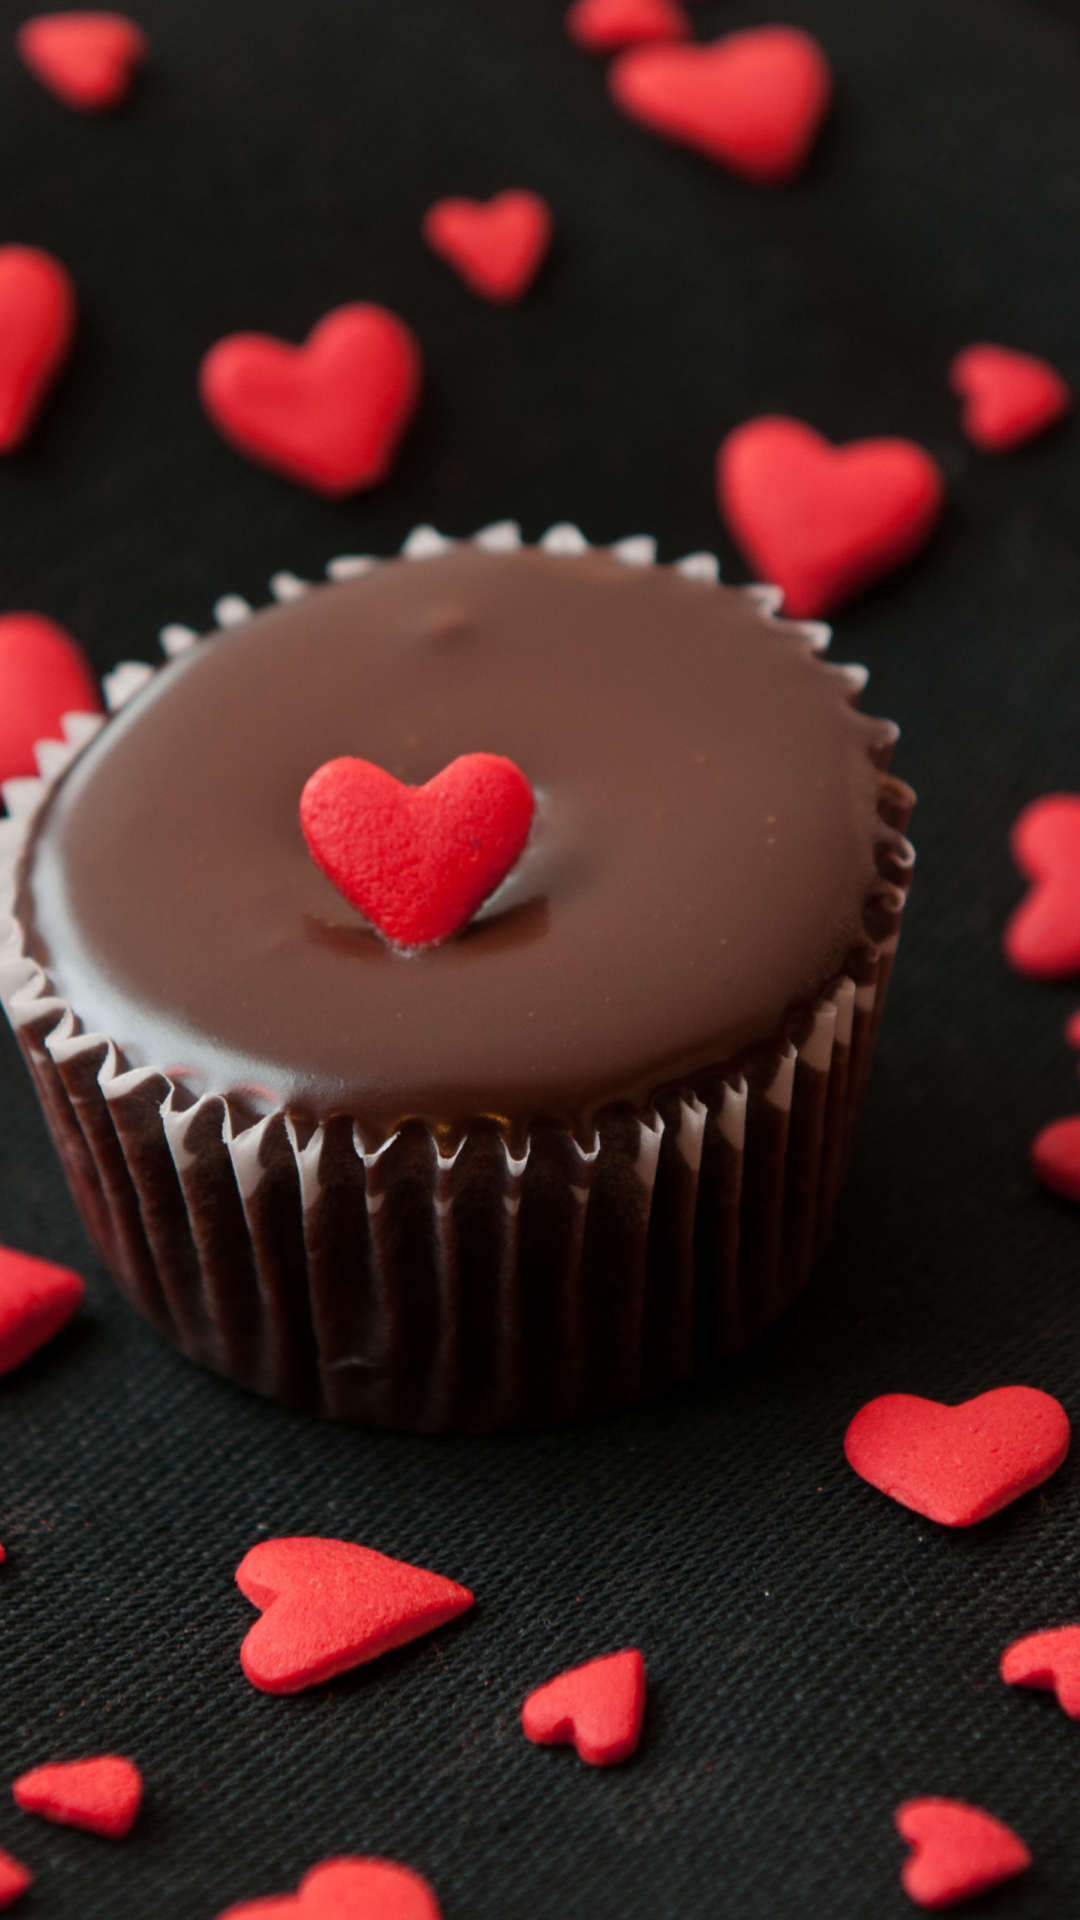 Chocolate Cupcake With Red Heart wallpaper 1080x1920